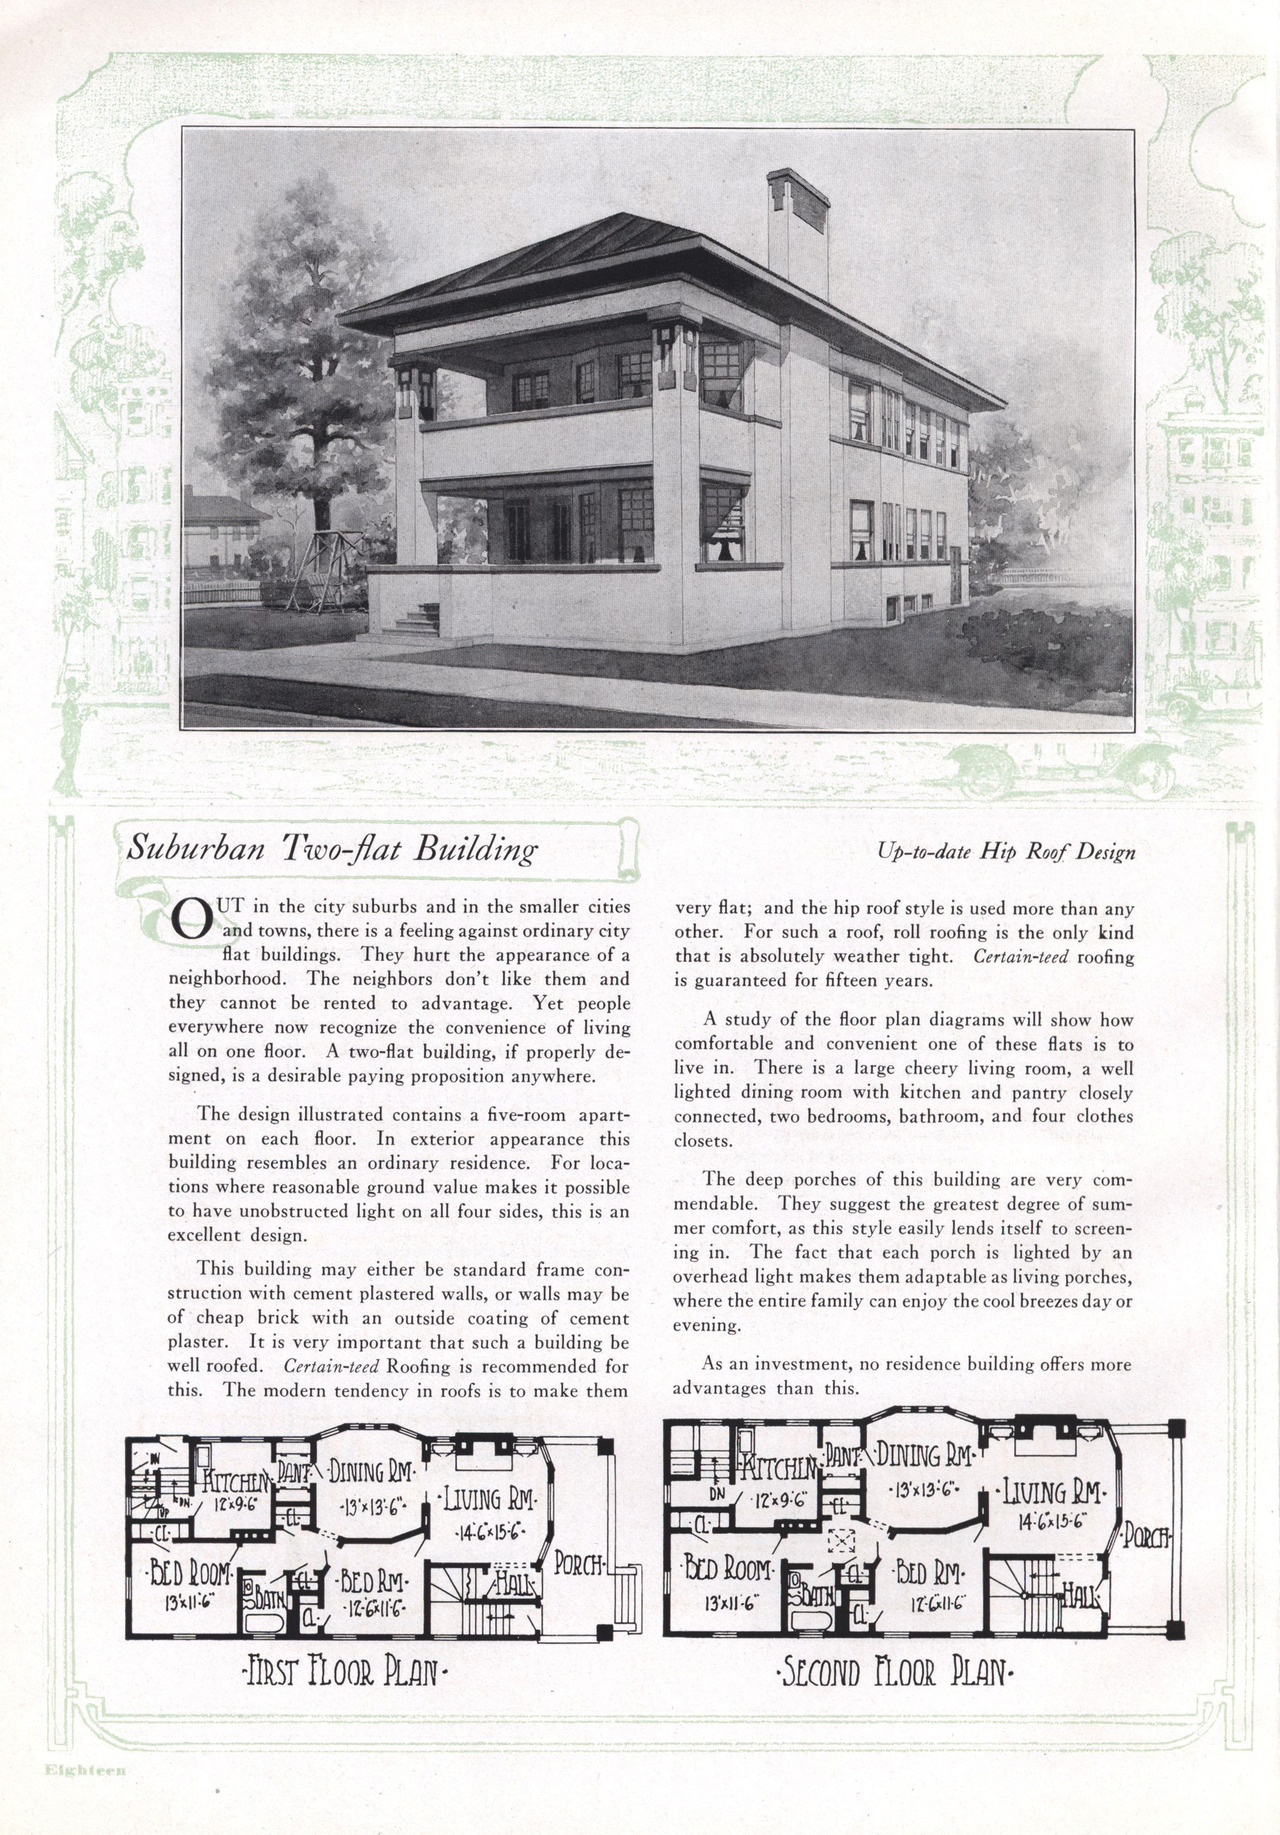 vintagehomeplans:  United States, 1913: Suburban Two-flat BuildingA duplex with a